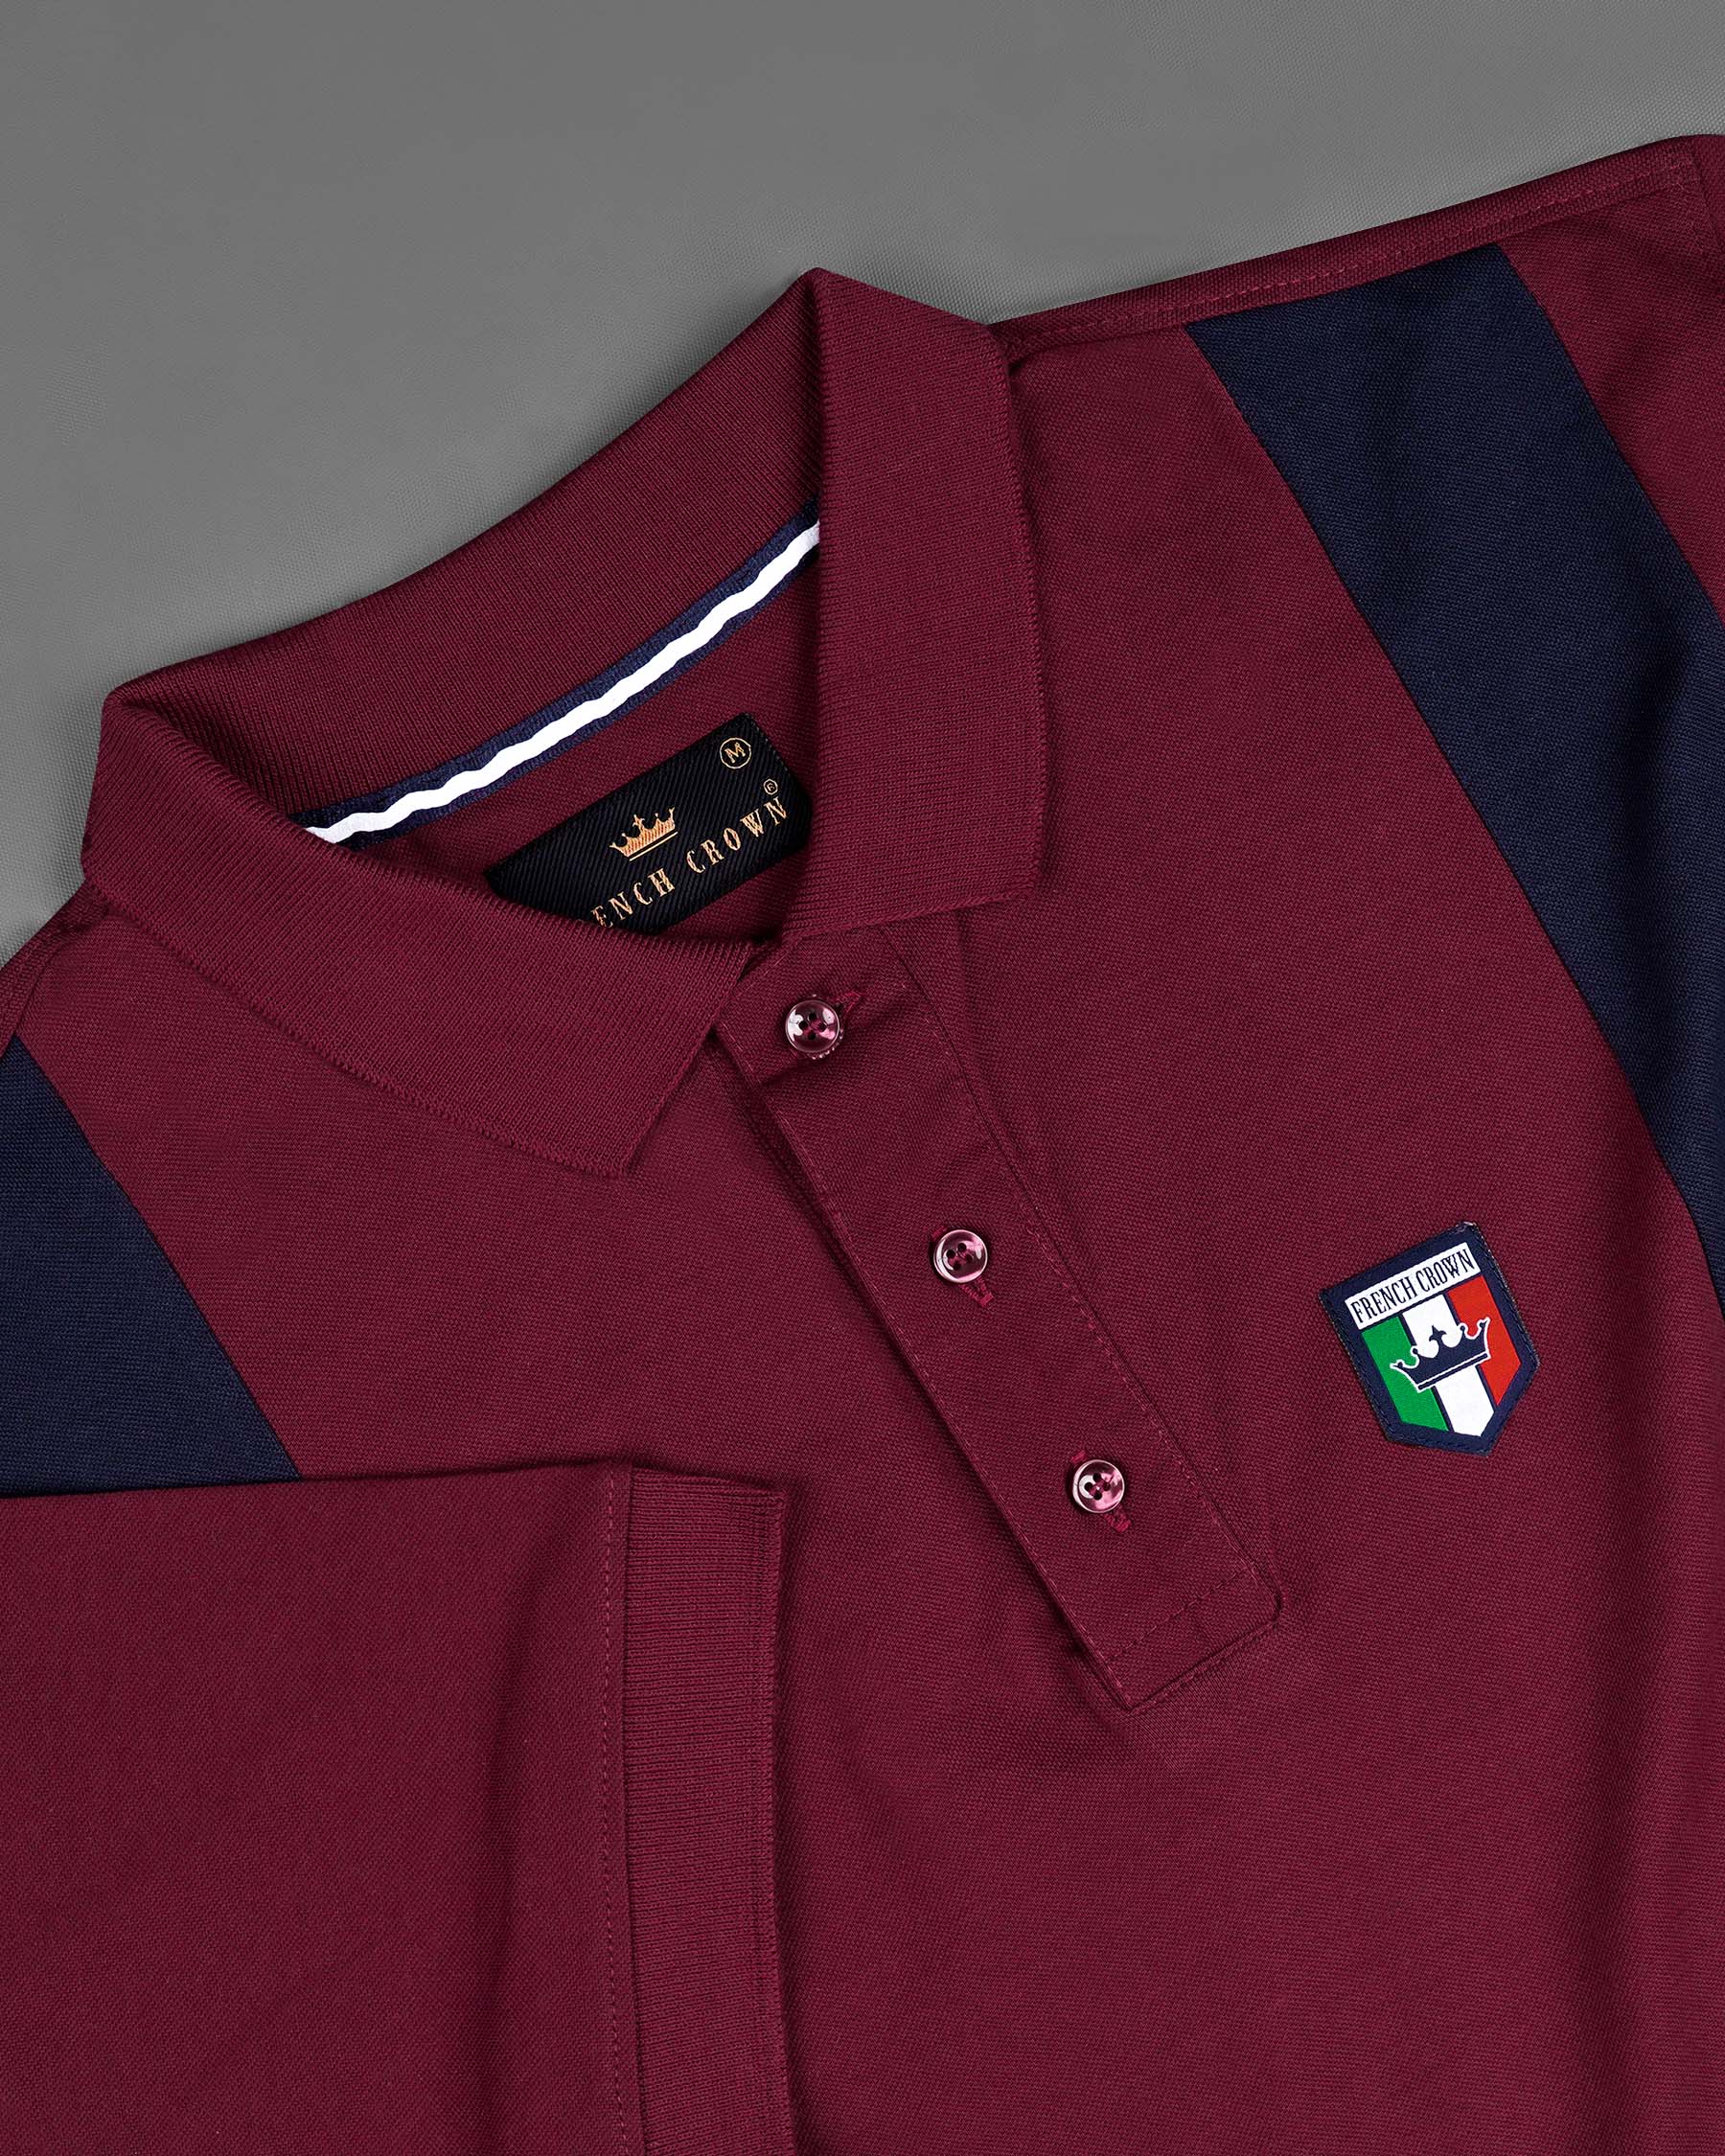 Mulberry Red and Haiti Blue Super Soft Pique Polo T Shirt TS542-S, TS542-M, TS542-L, TS542-XL, TS542-XXL, TS542-3XL, TS542-4XL